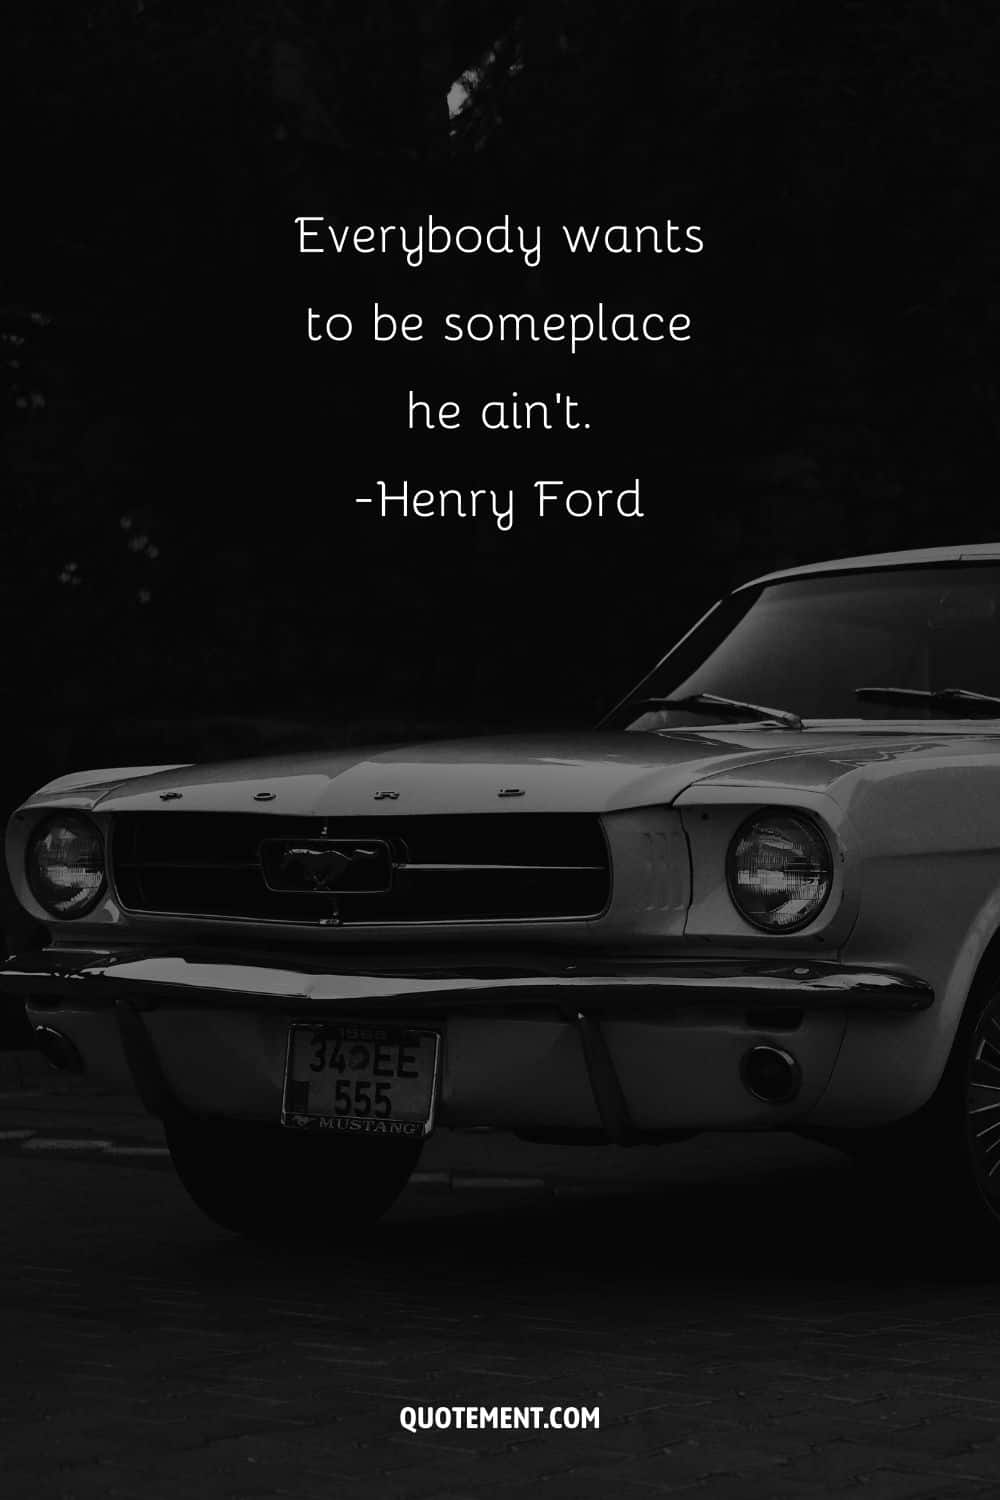 “Everybody wants to be someplace he ain't.” ― Henry Ford